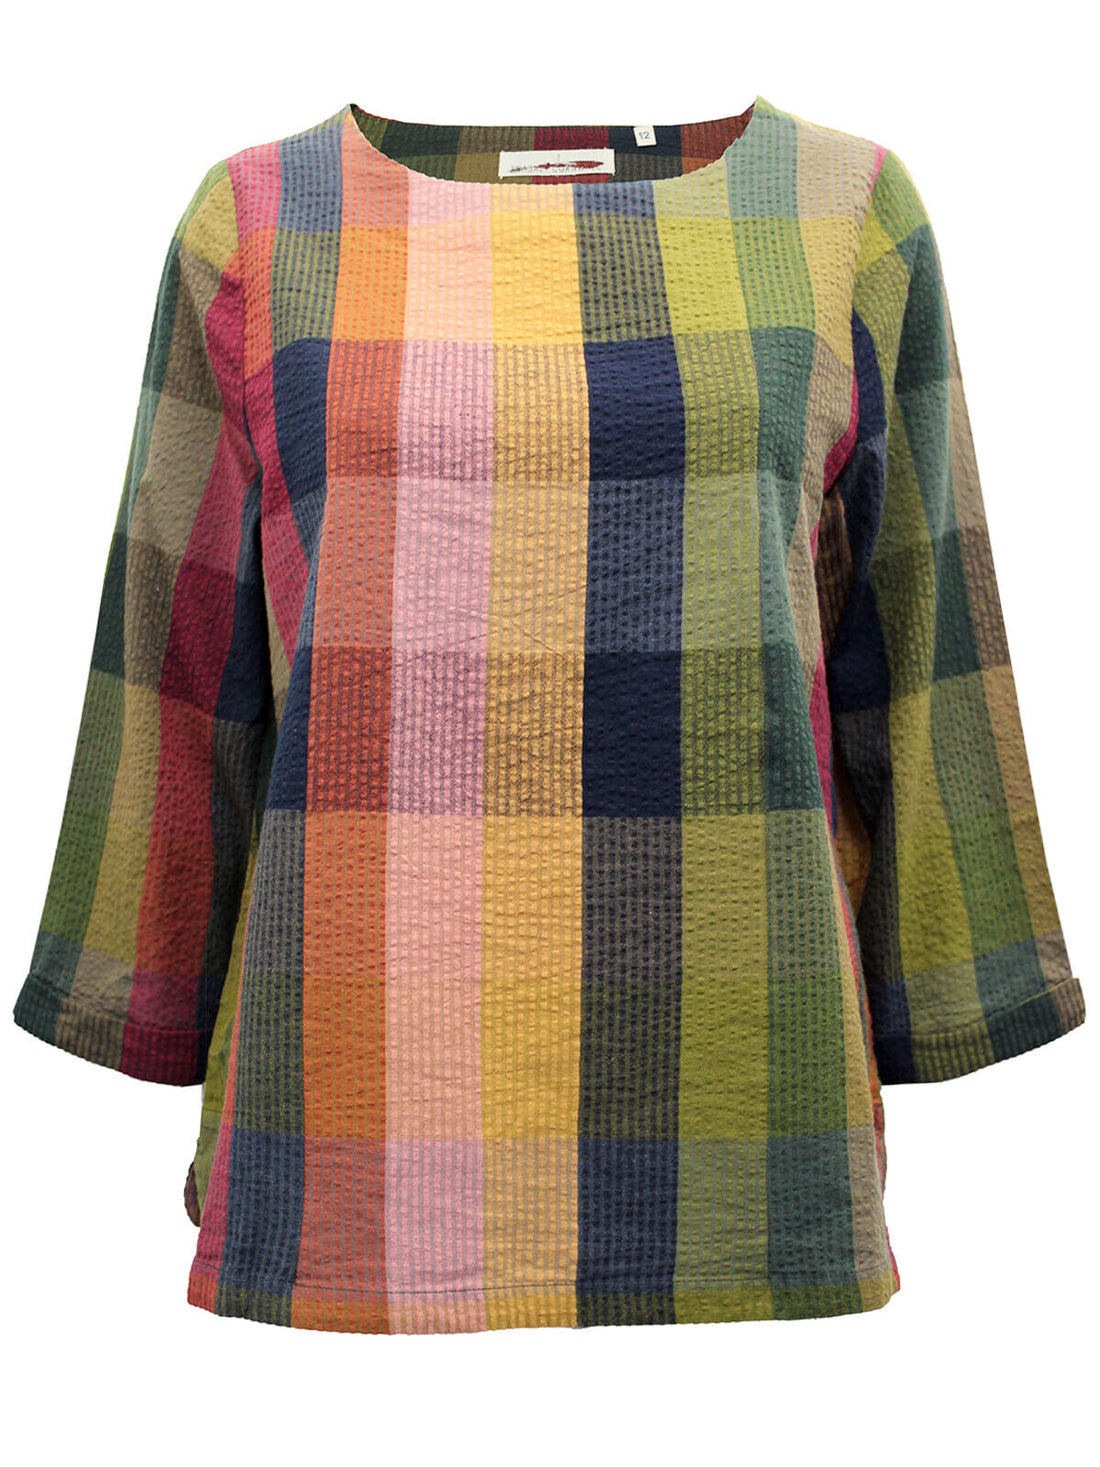 EX Seasalt Multi Riding High Checked Top Sizes 12, 14, 16, 18, 20, 24 RRP £55.95